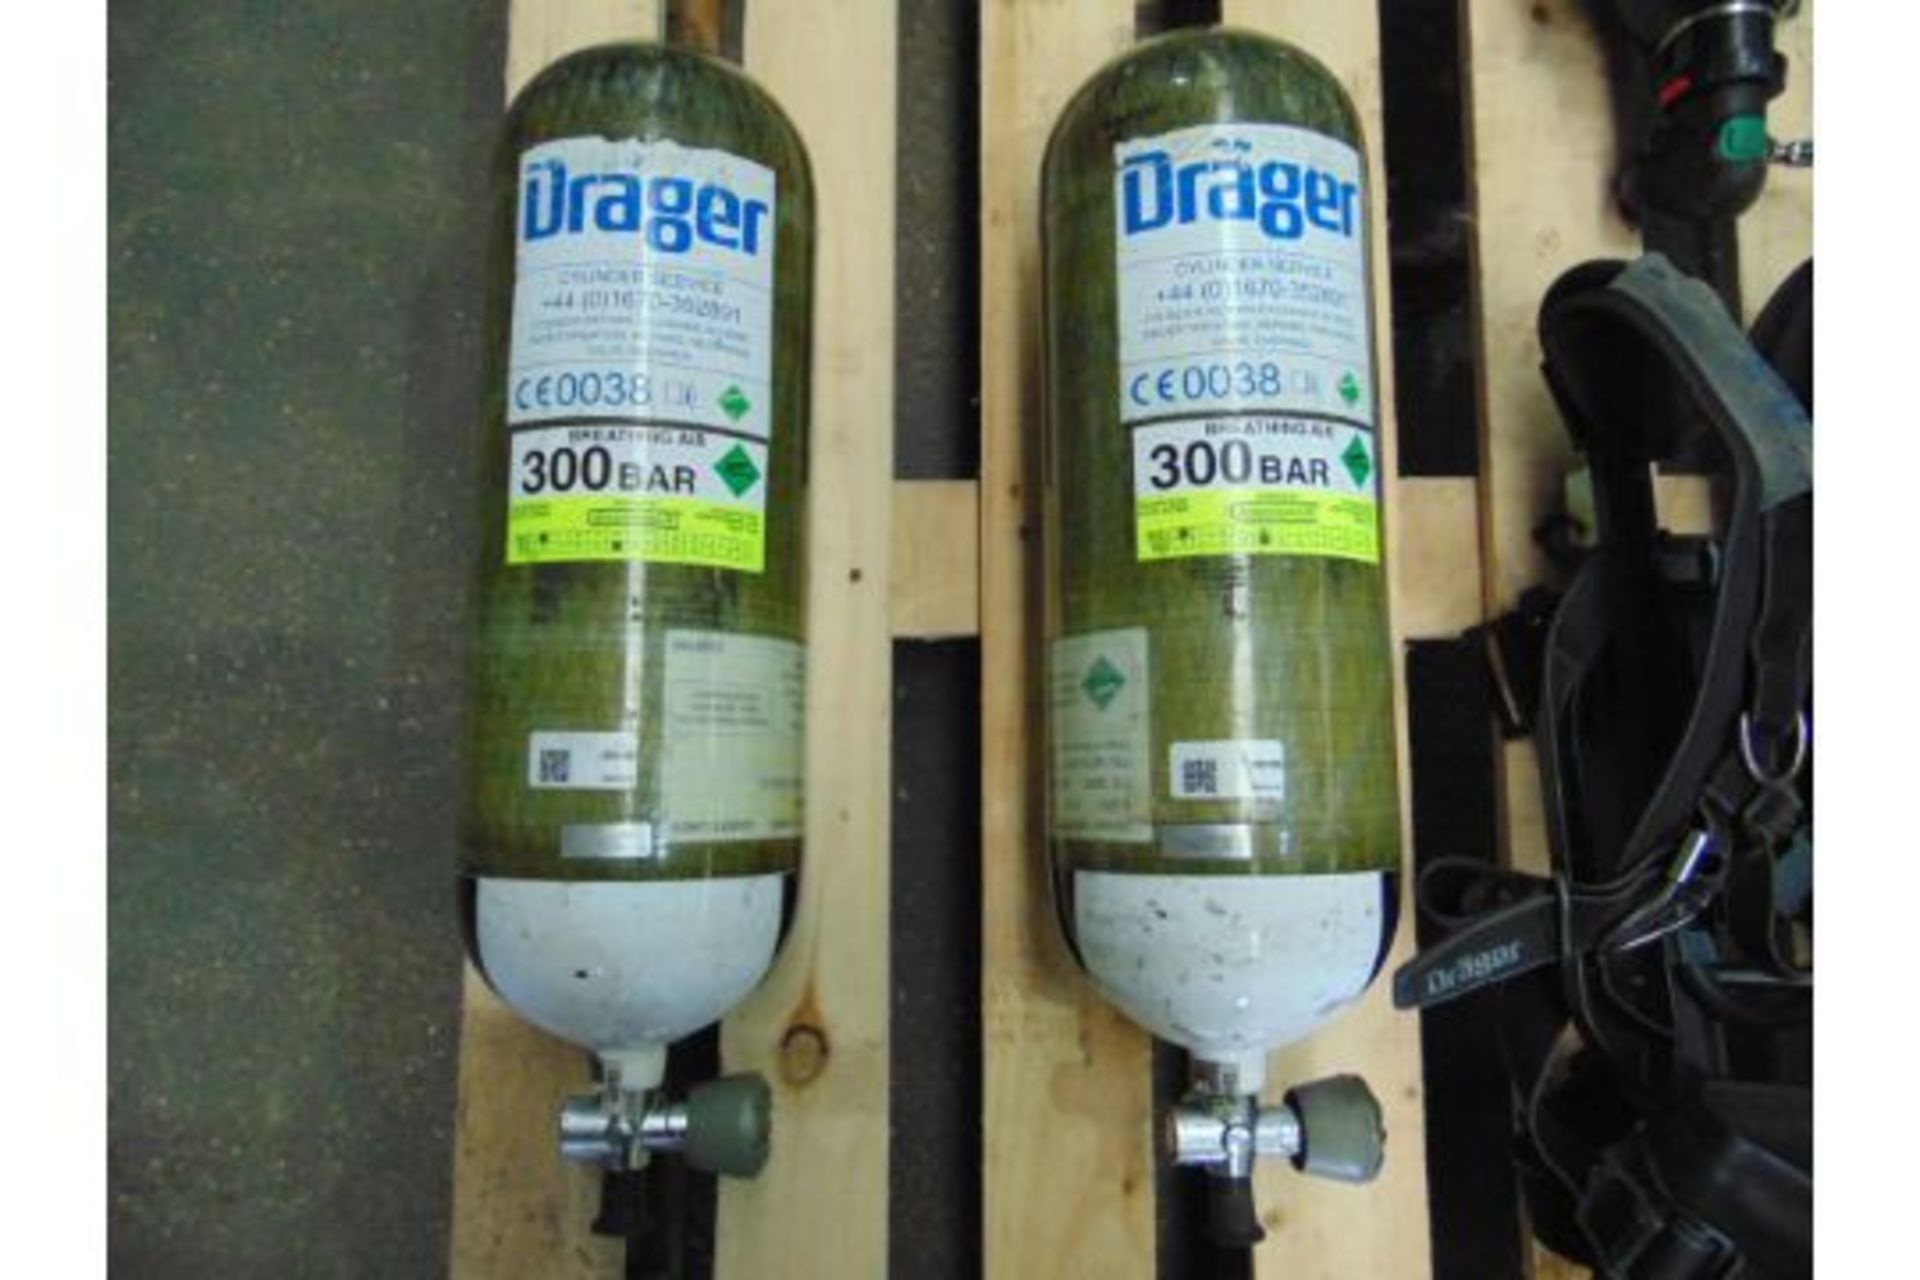 Drager PSS 7000 Self Contained Breathing Apparatus w/ 2 x Drager 300 Bar Air Cylinders - Image 3 of 23